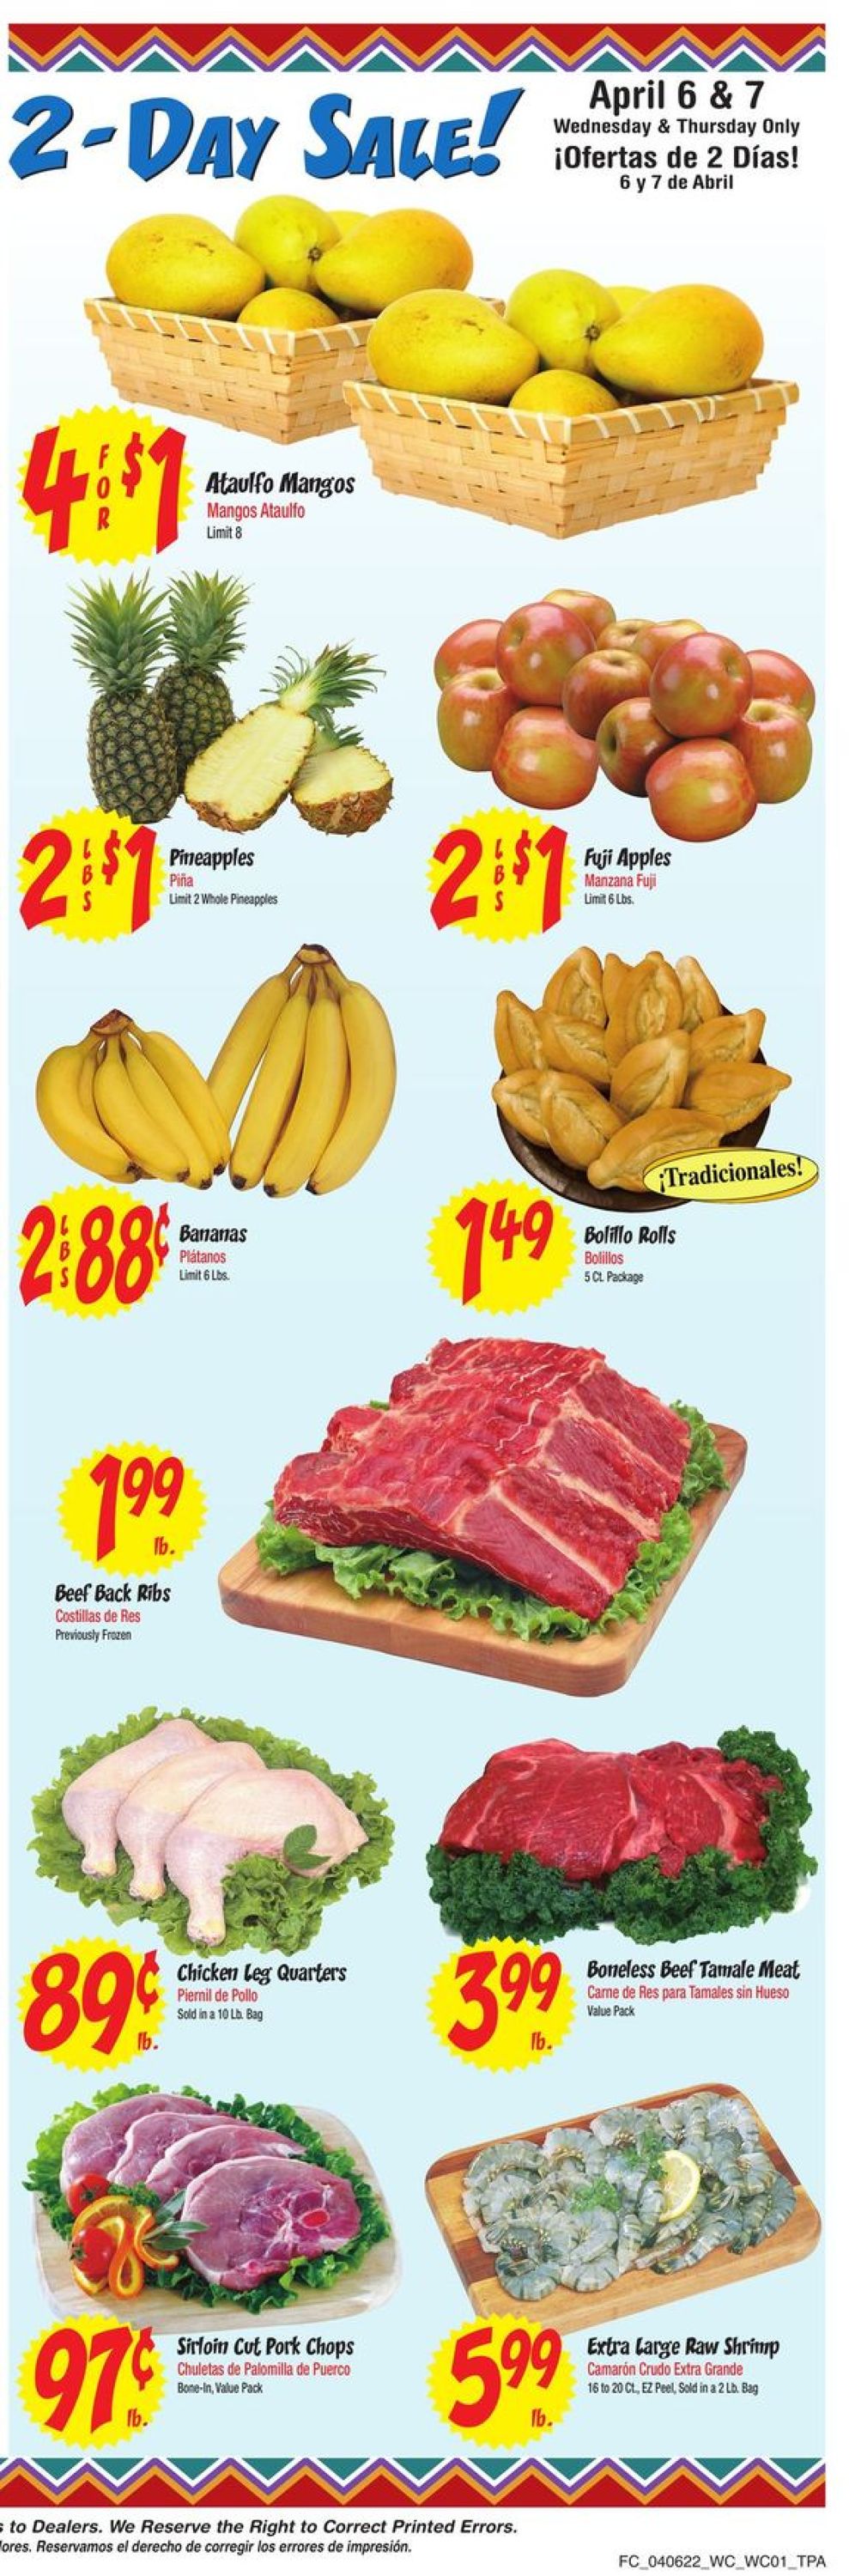 Food City Ad from 04/06/2022